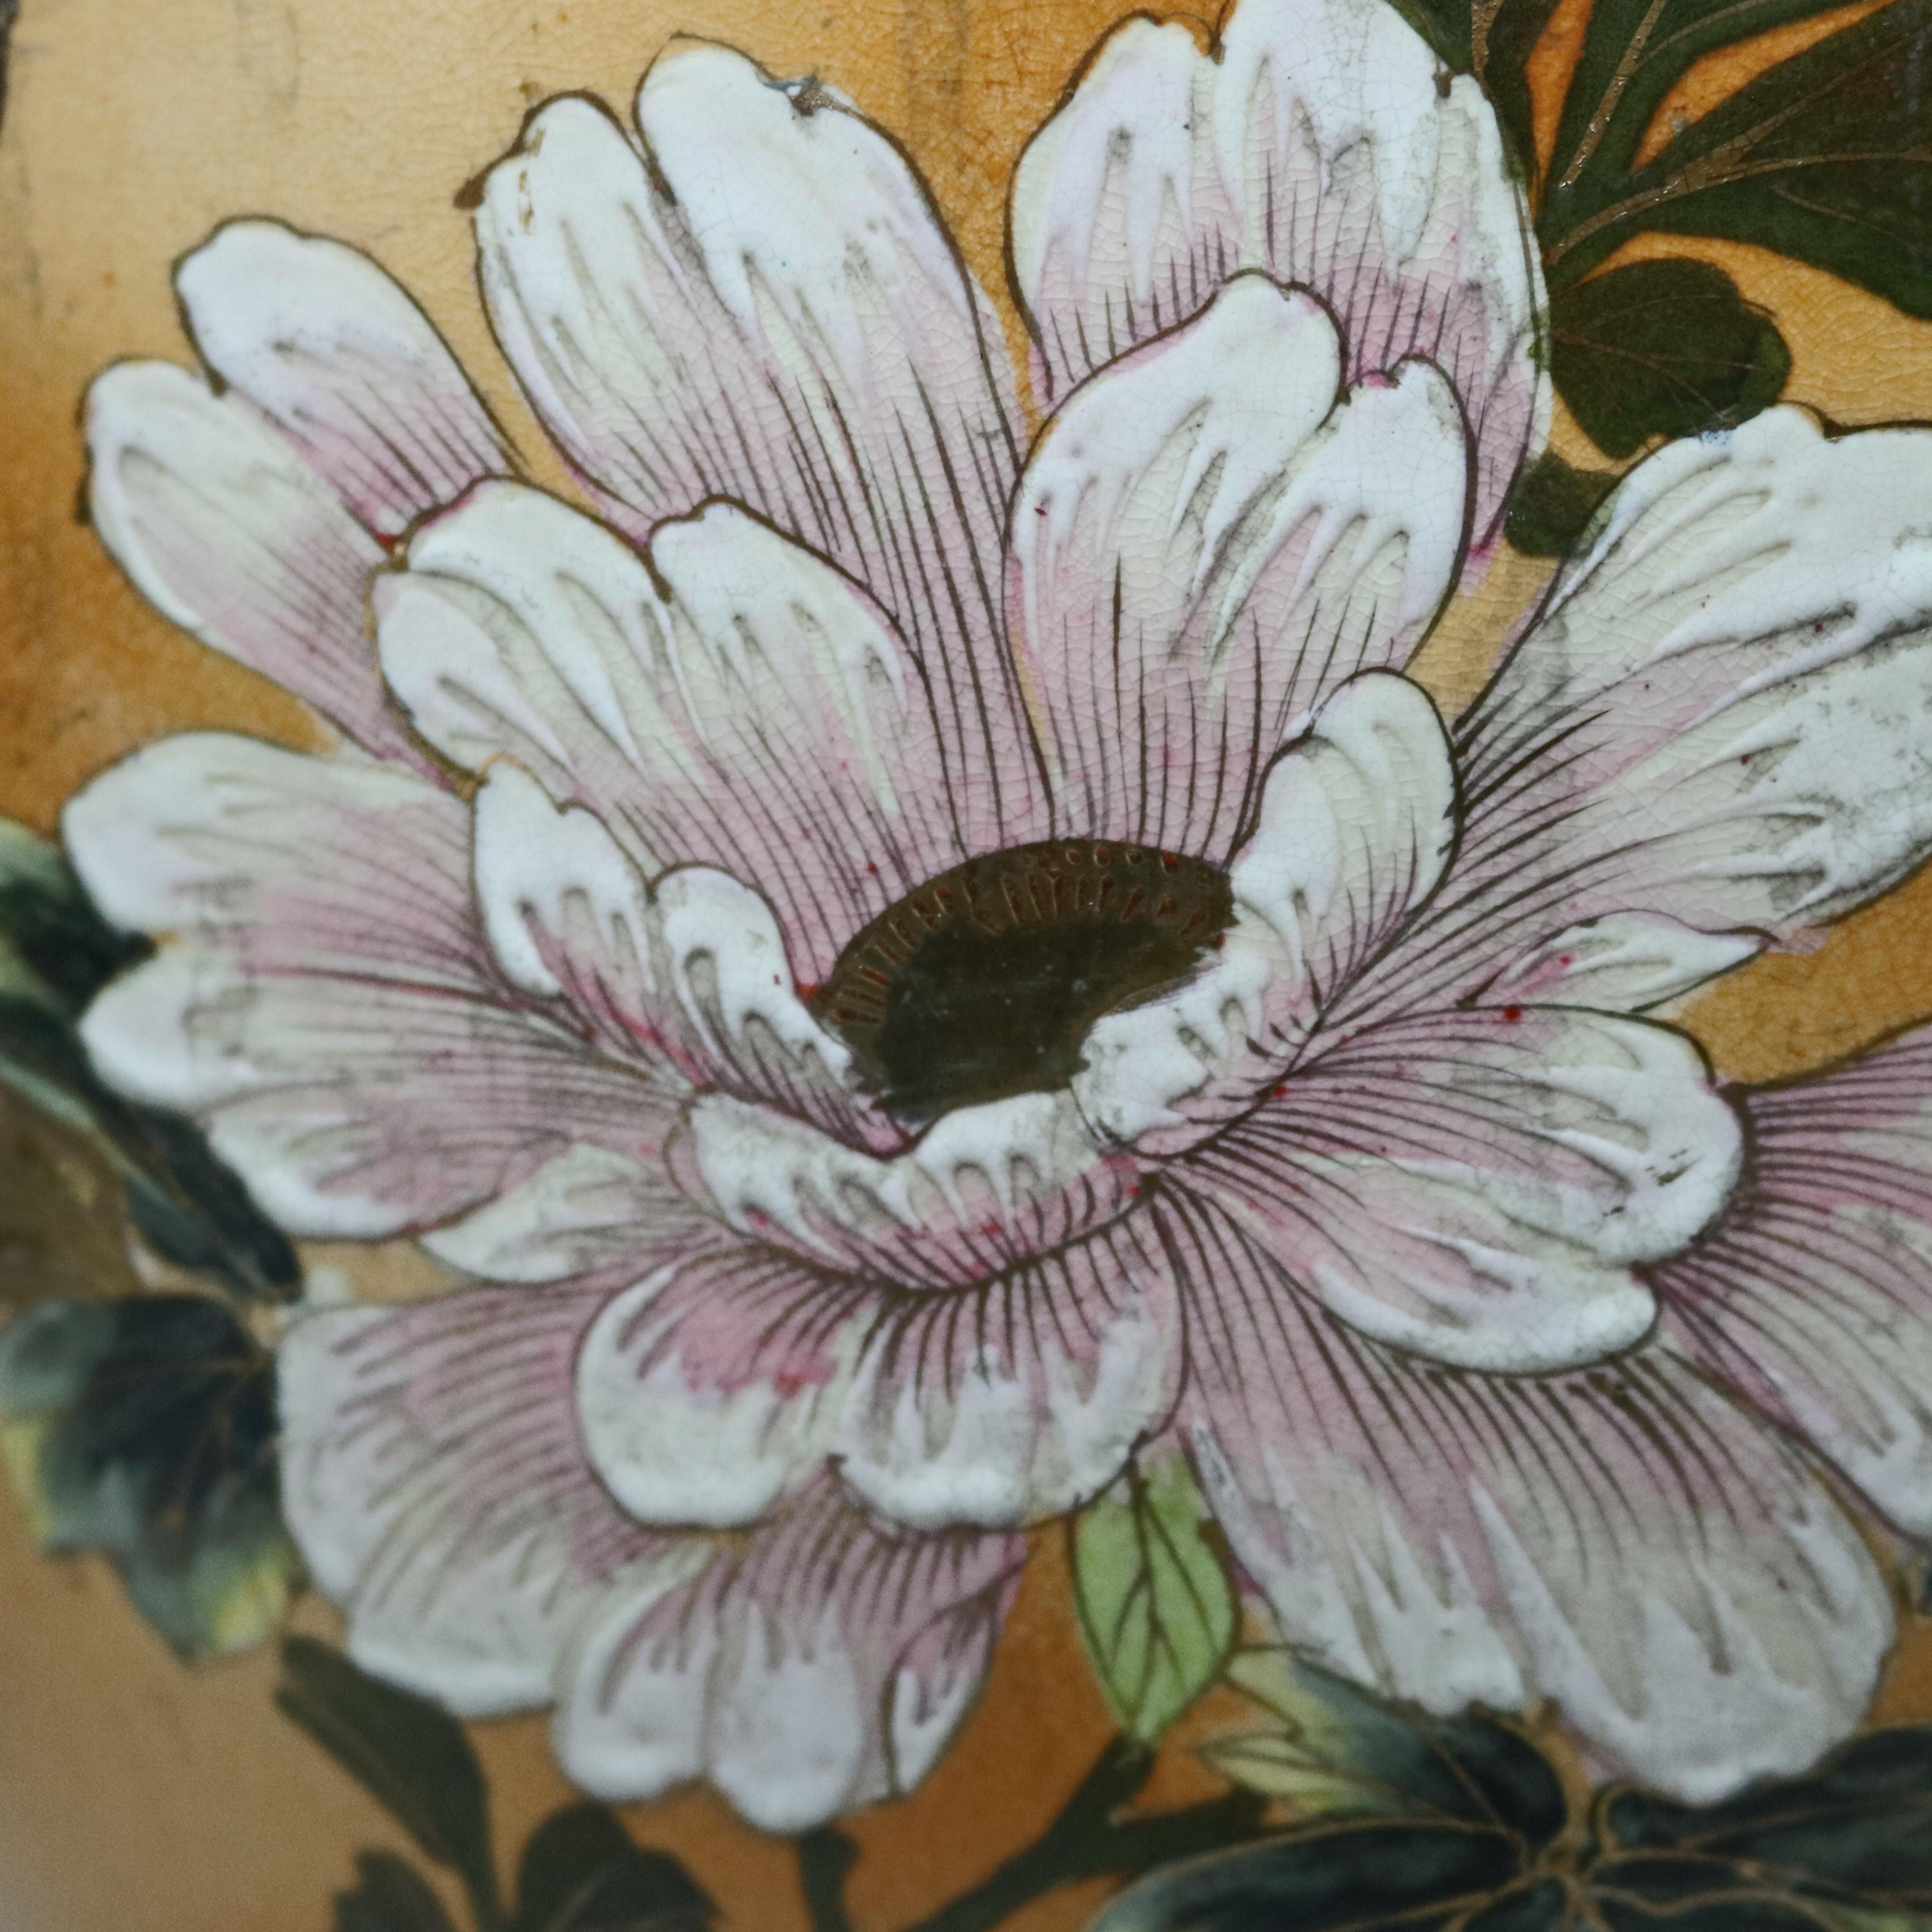 An antique and oversized Asian floor vase offers porcelain construction in urn form with hand painted floral decoration, circa 1900

Measures - 29.5